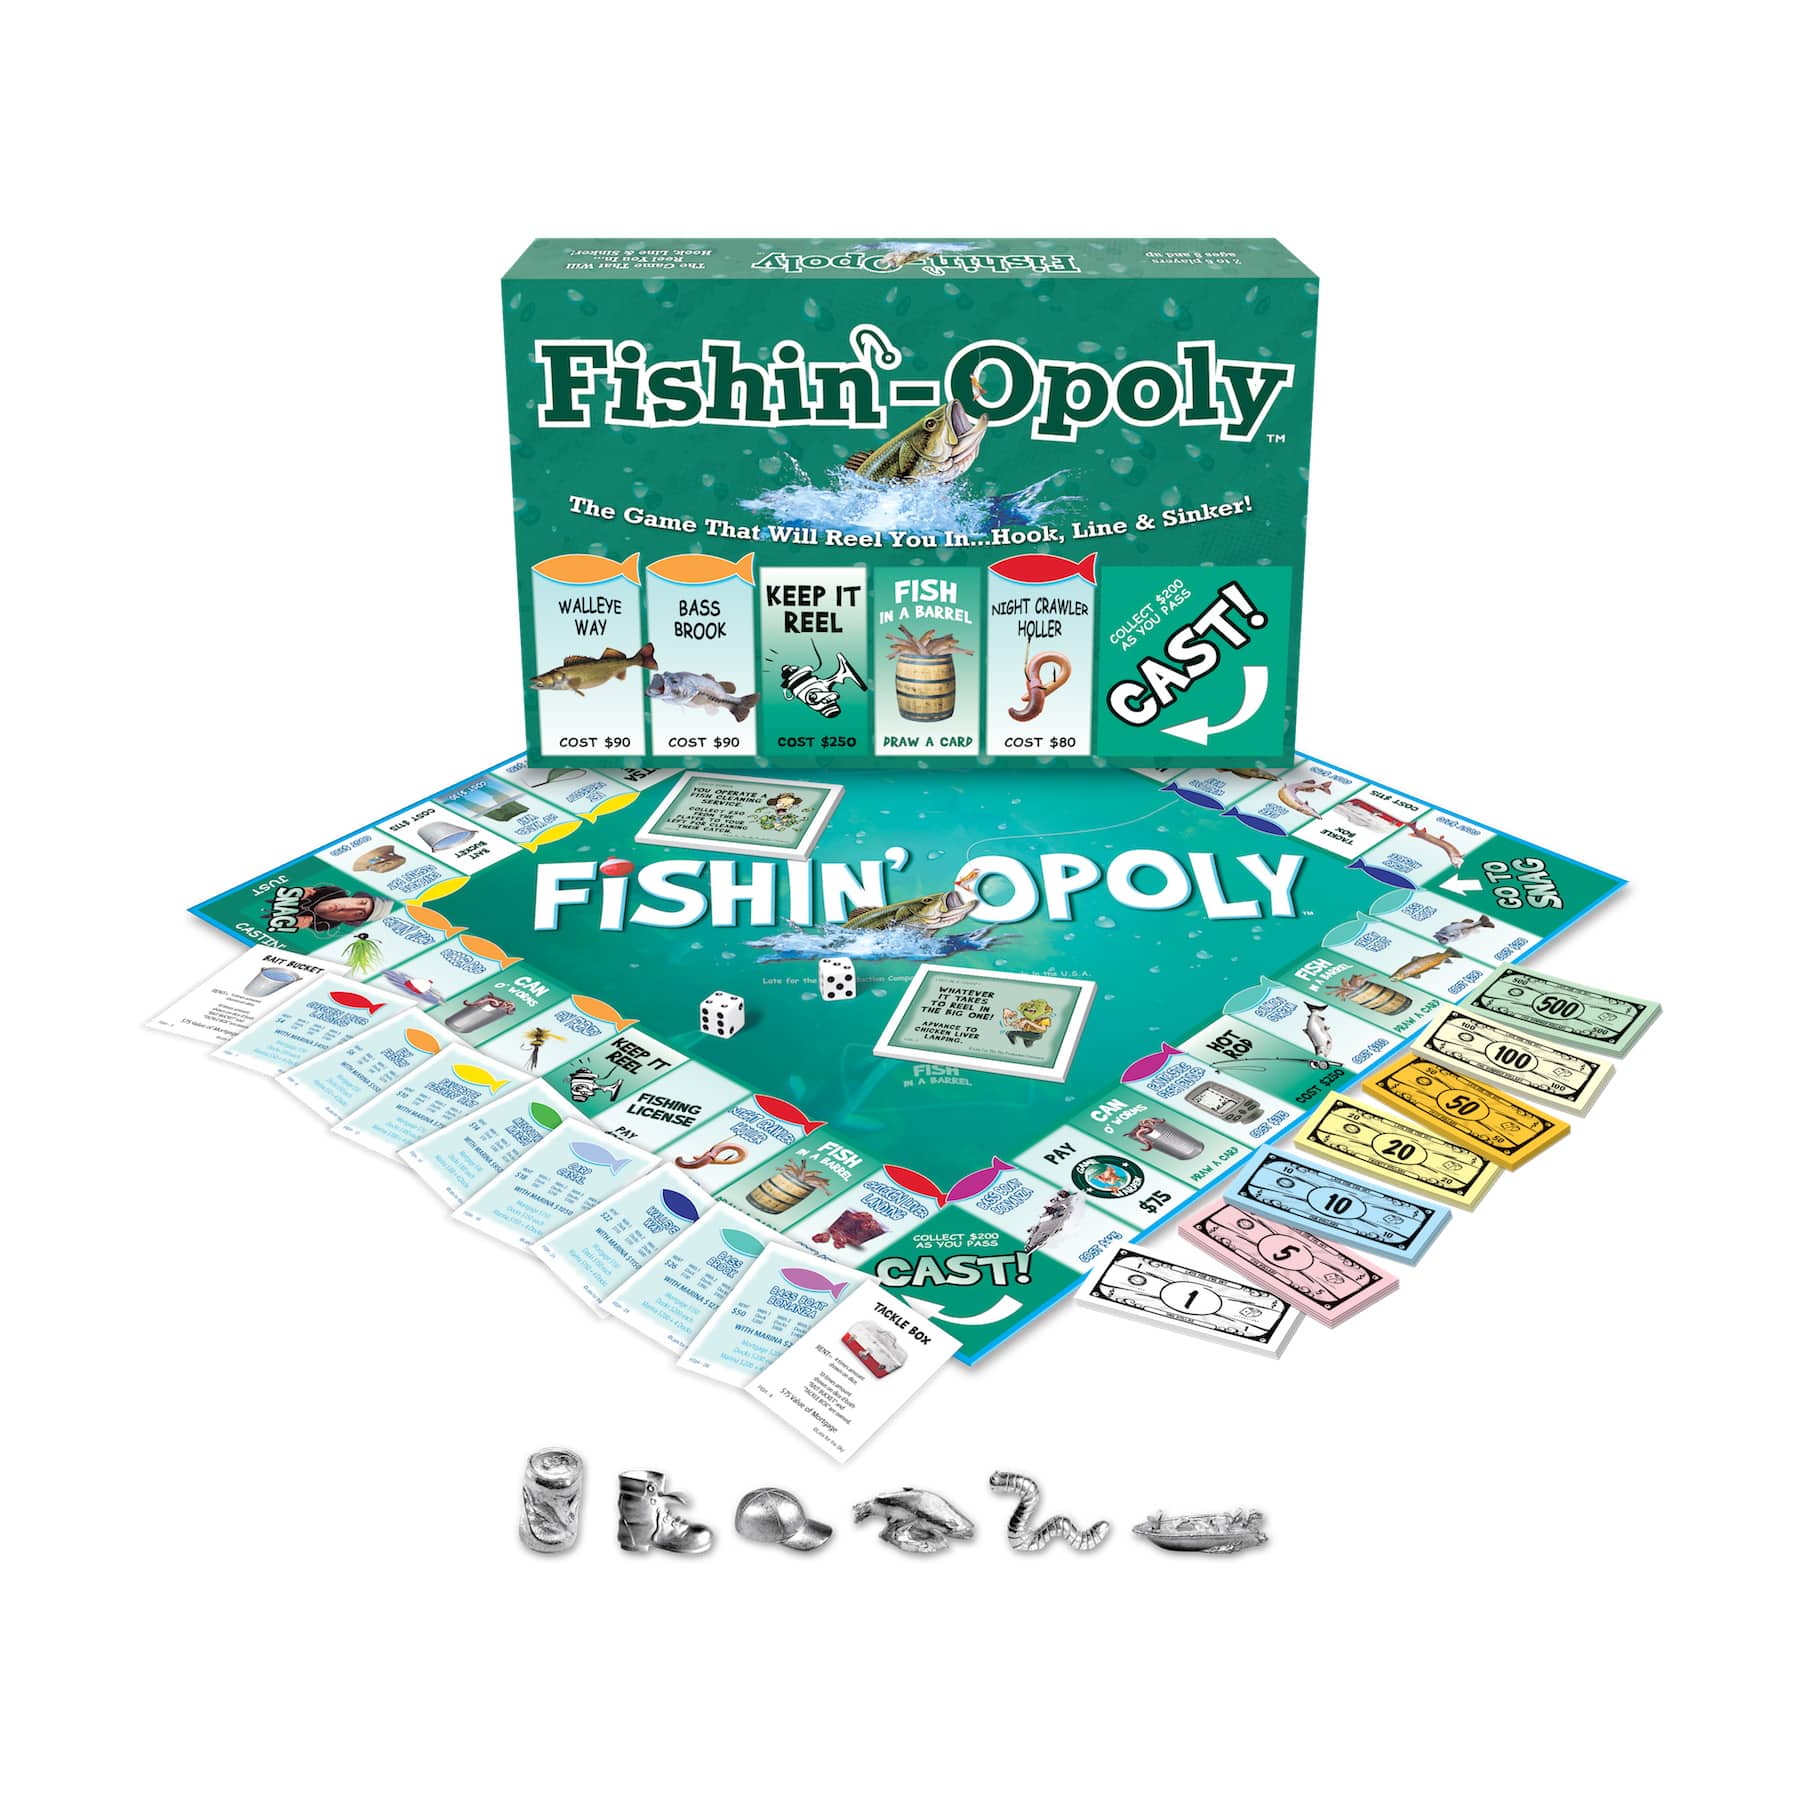 New in Sealed Box Spring Lake-opoly Board Game 